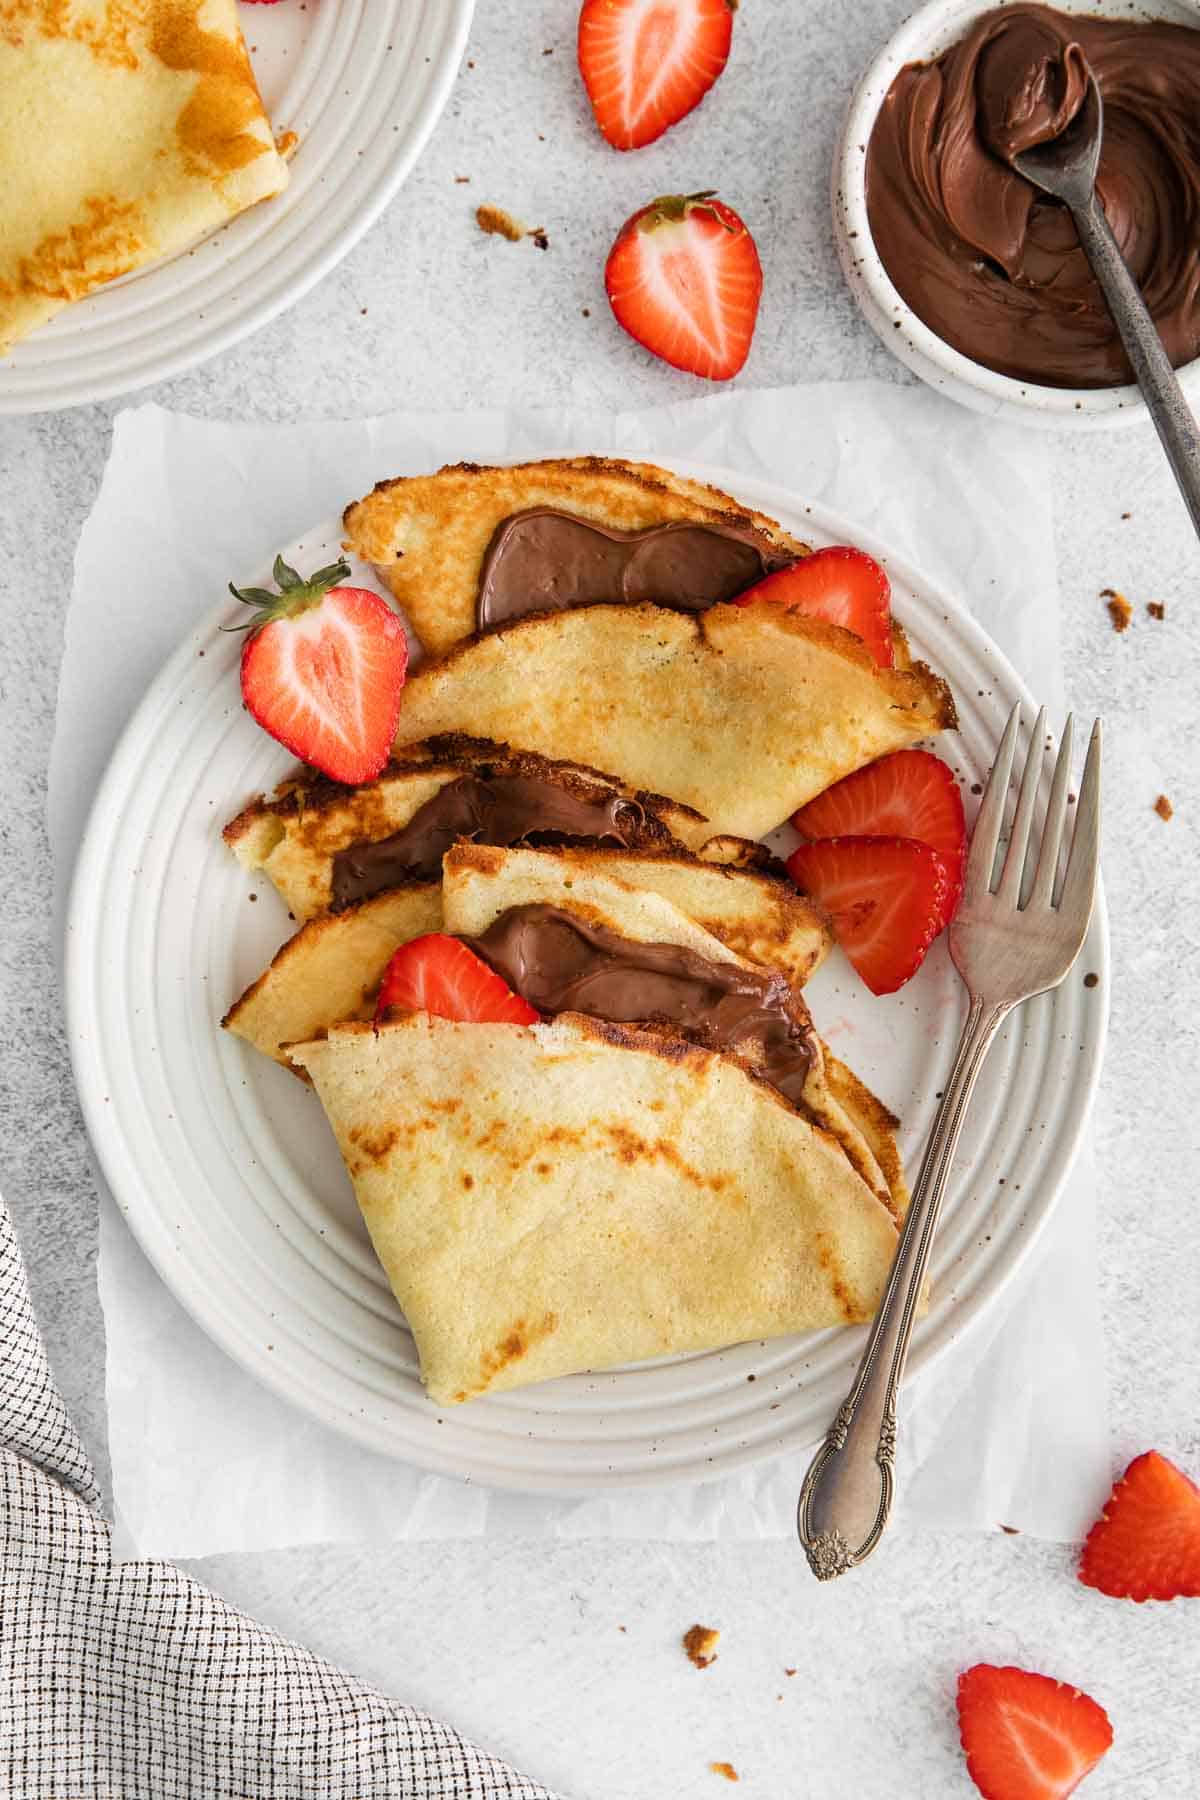 Crepes on a plate with a fork next to it